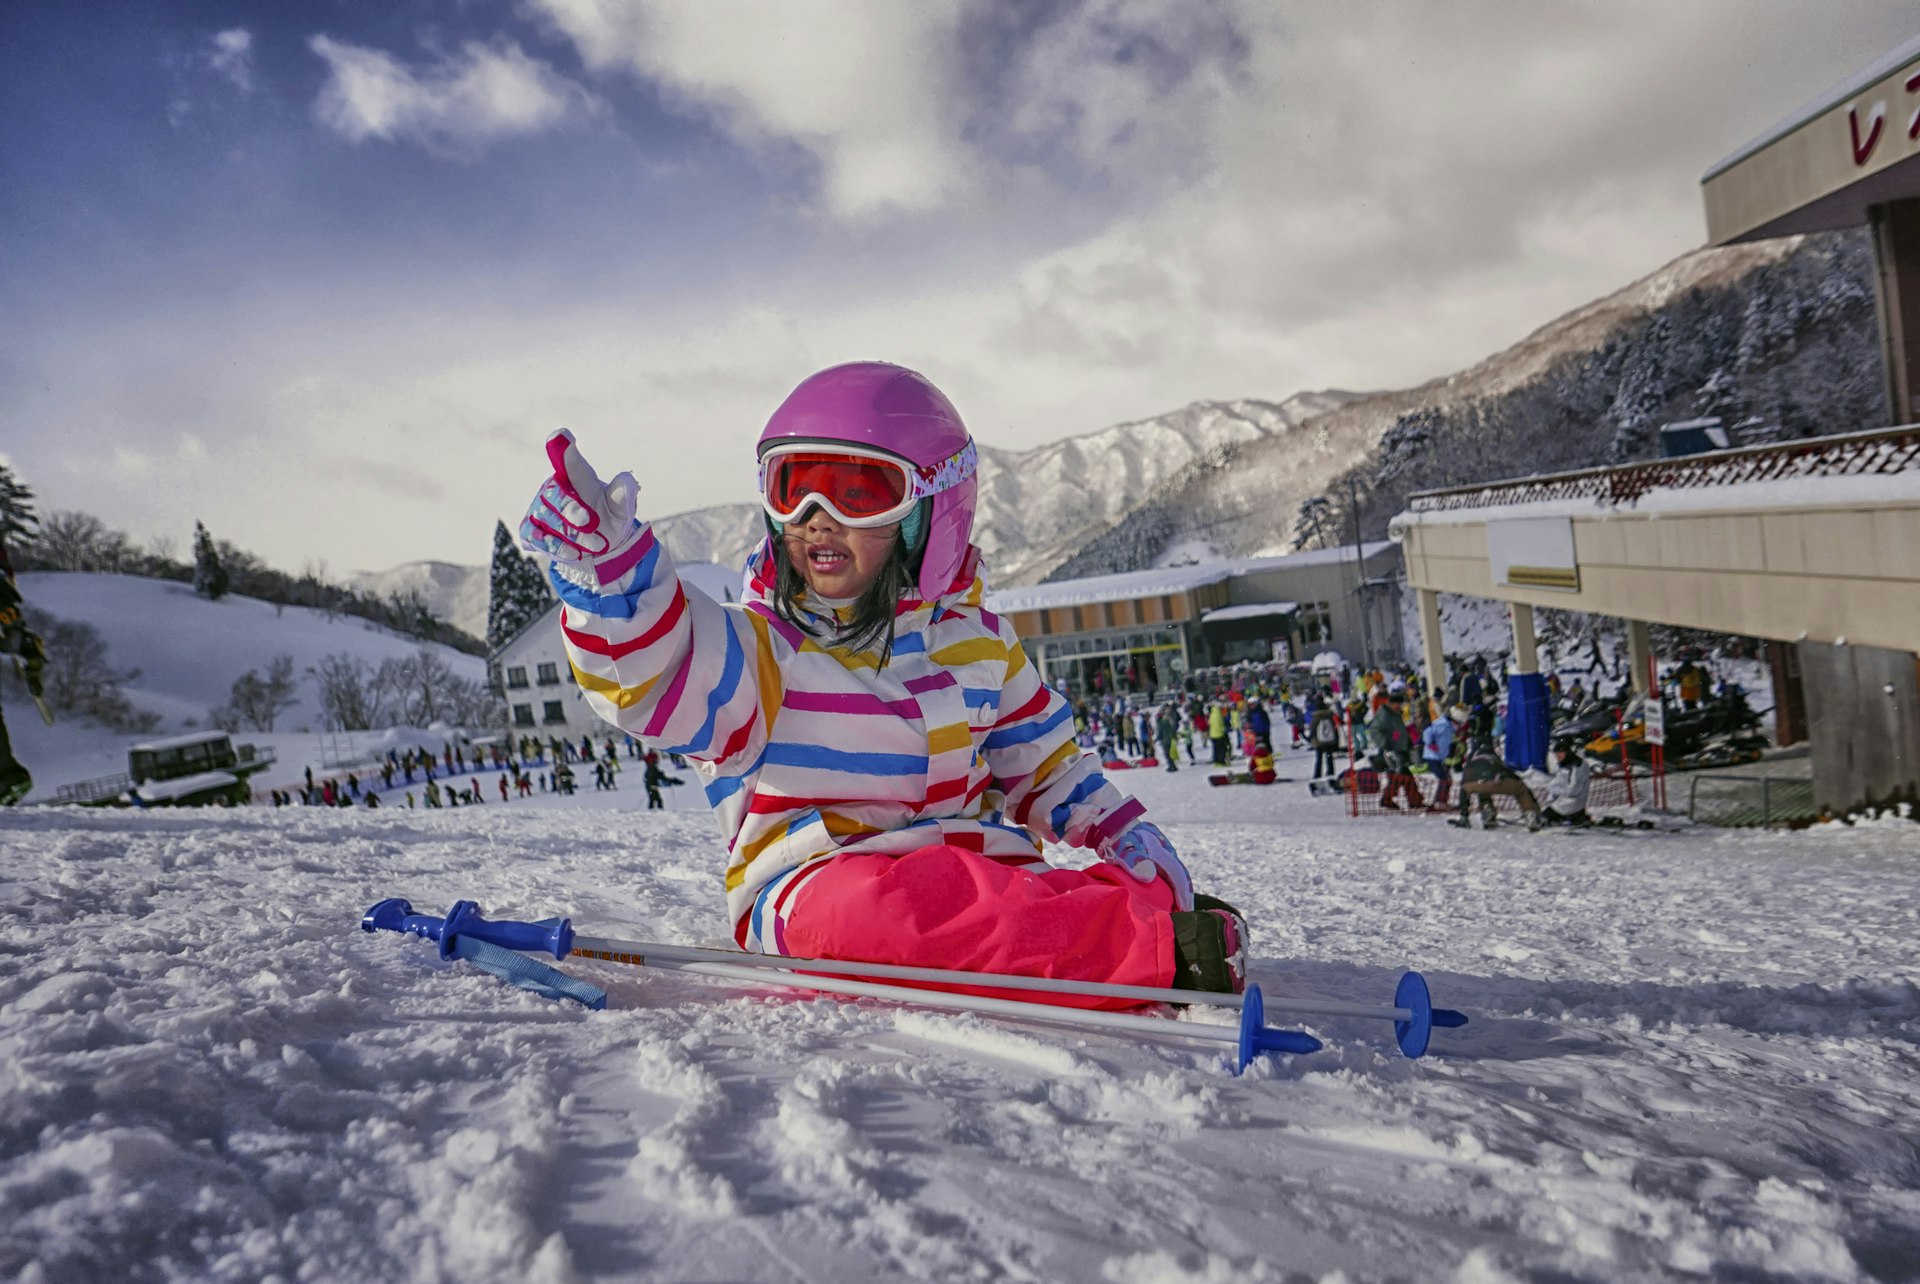 A small Japanese child sits playing in the snow on a ski slope